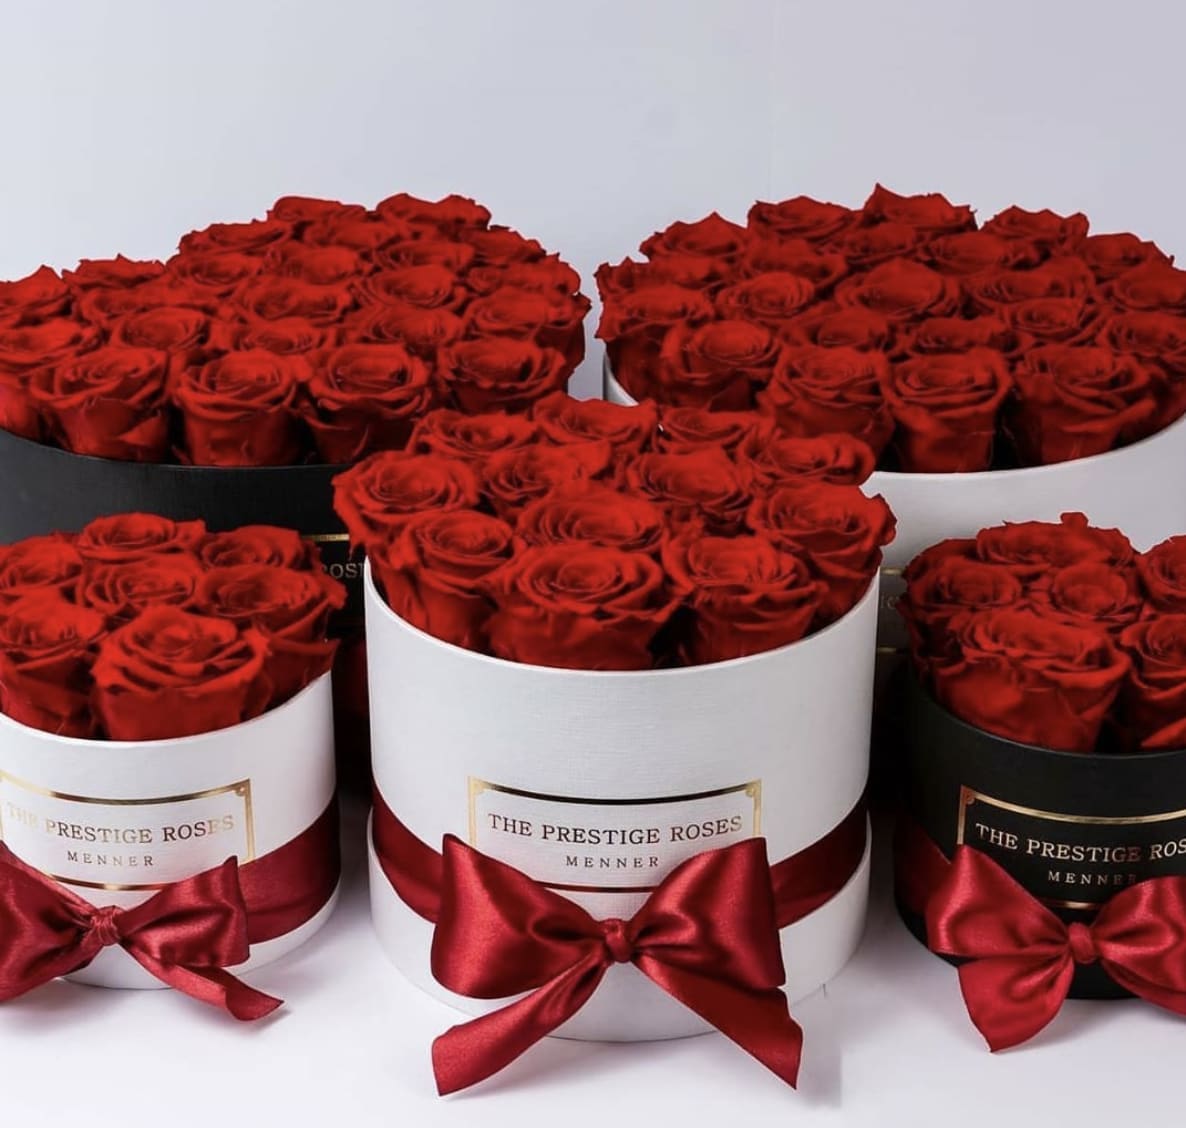 Amazing Love designed with flowers and roses in a luxury box